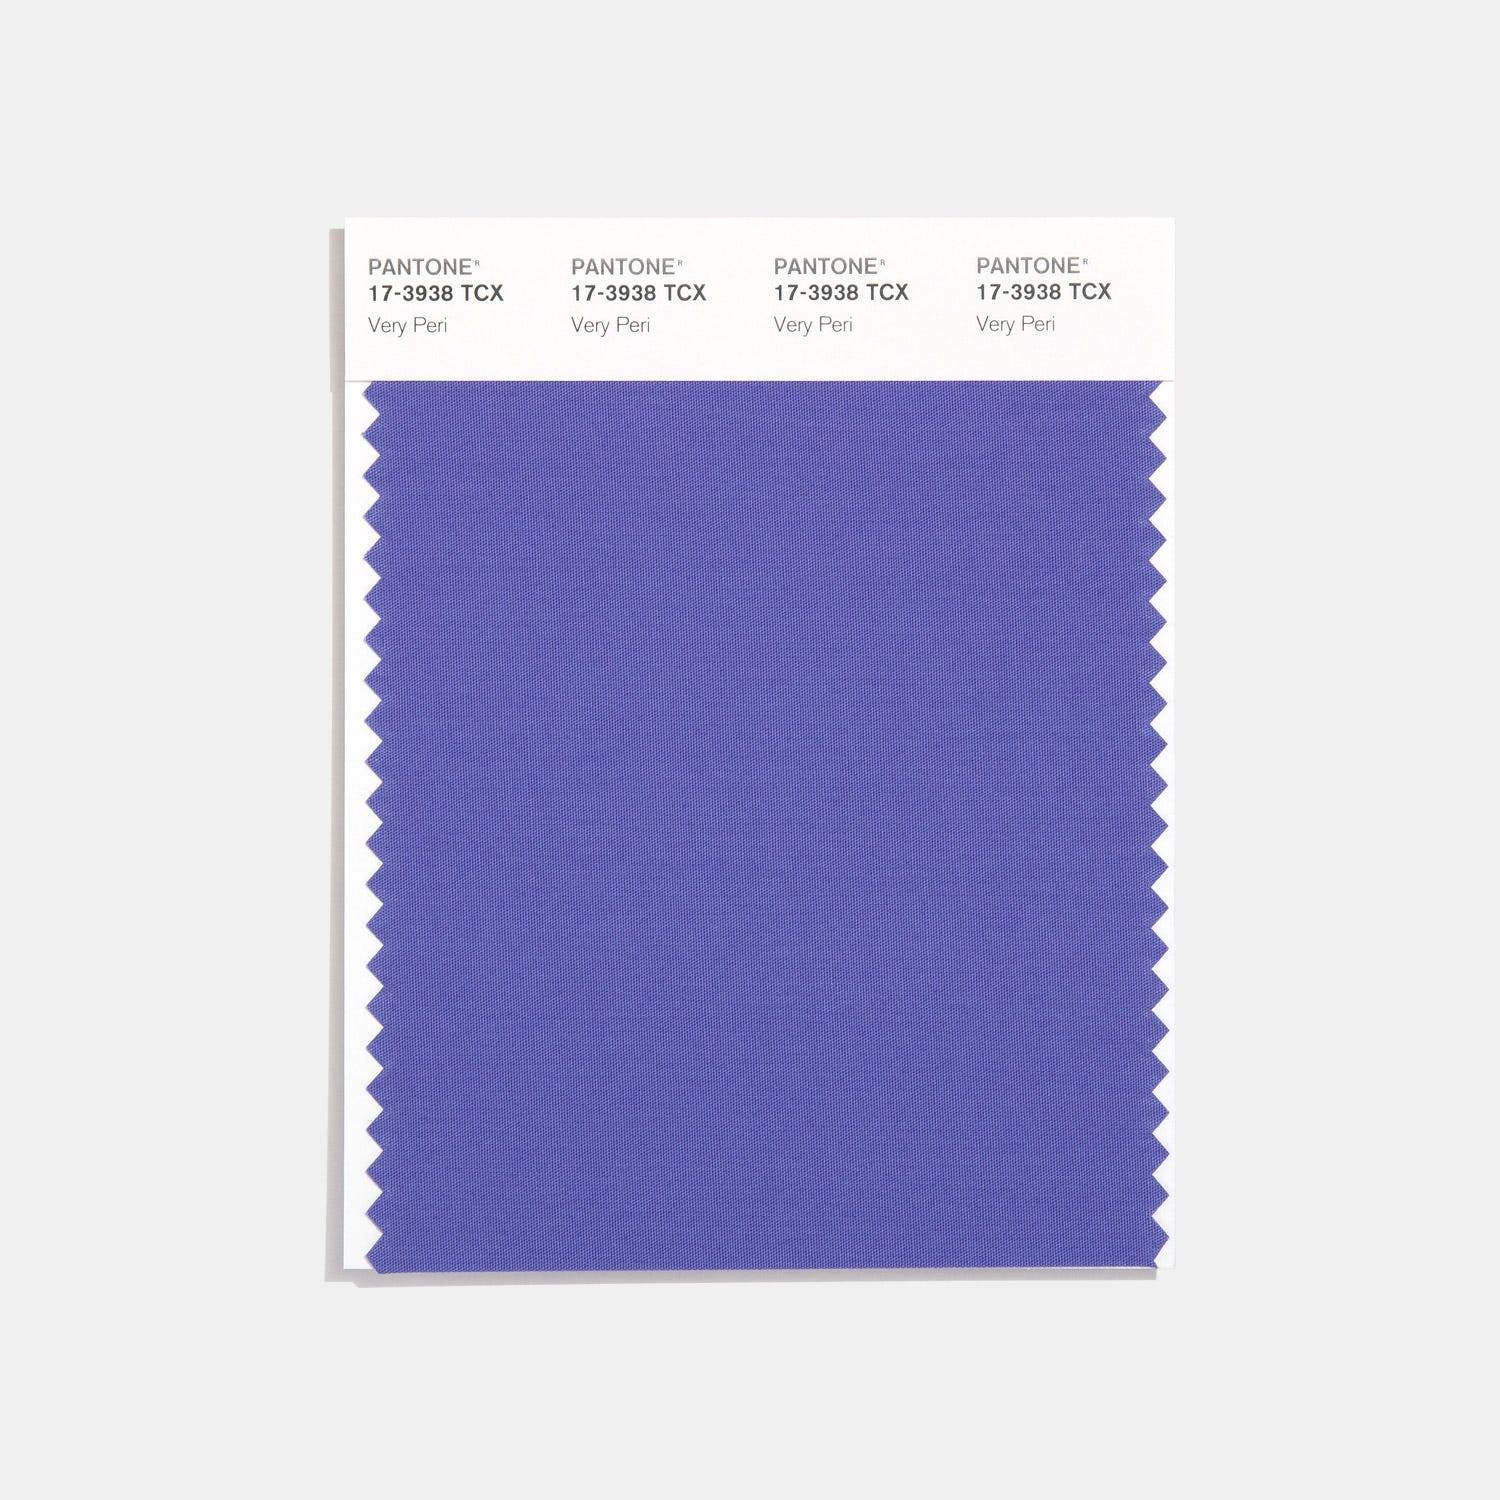 Very Peri is the color of the year for 2022 (from Pantone)